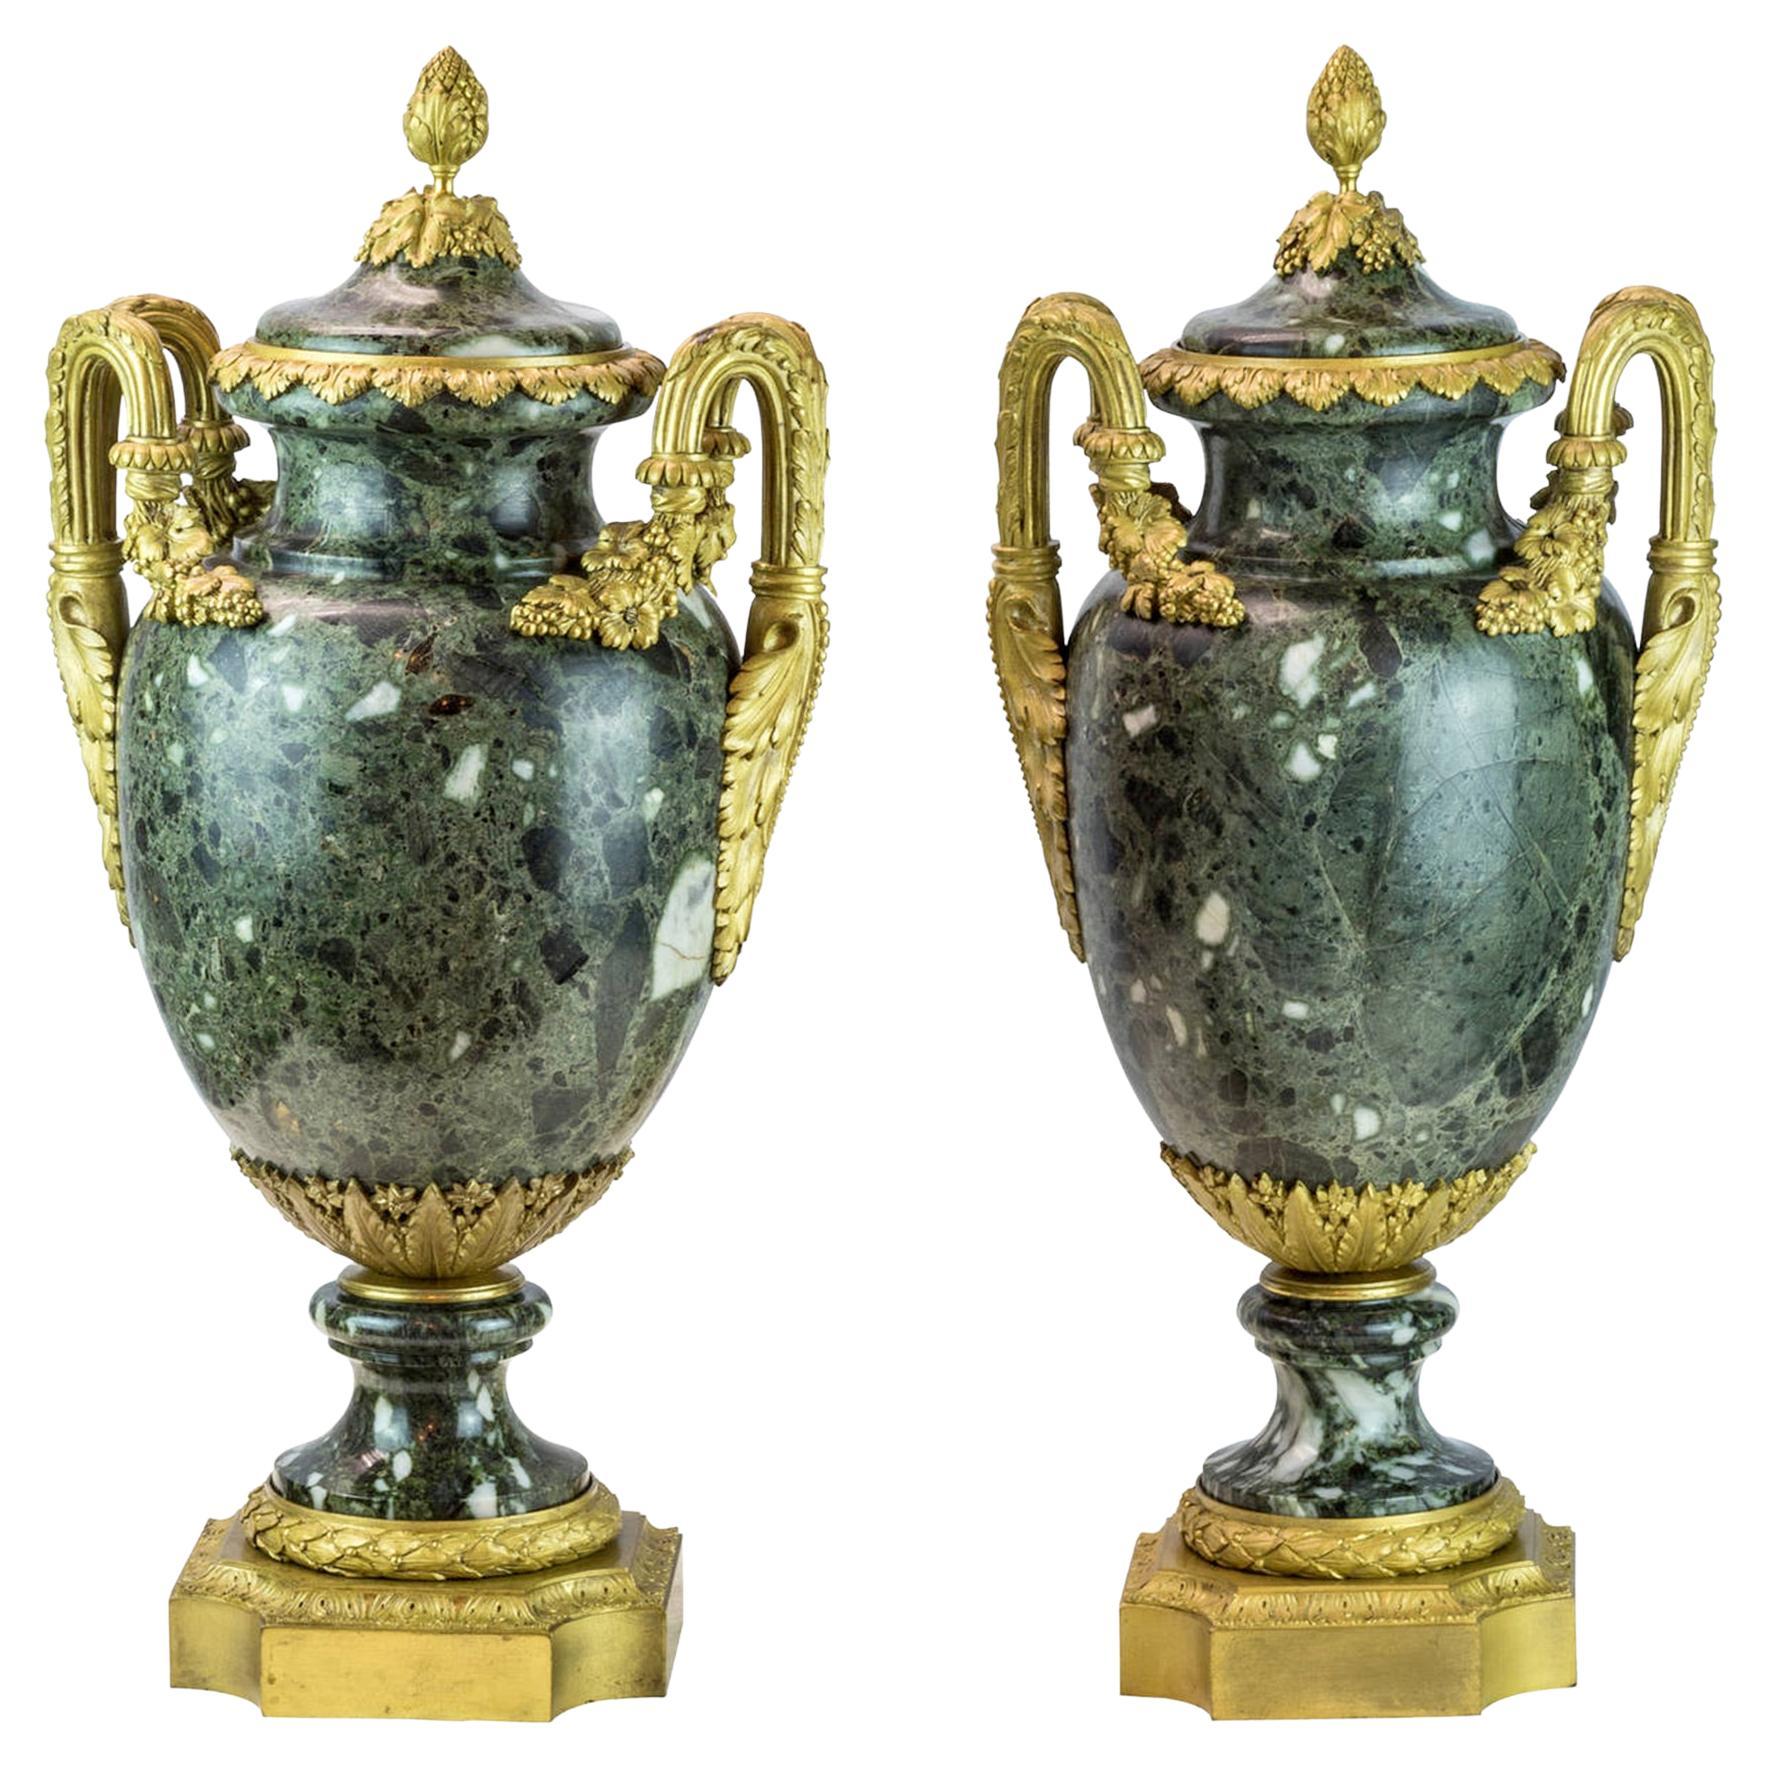 Important Pair of Louis XVI Style Ormolu-Mounted Green Marble Vases For Sale